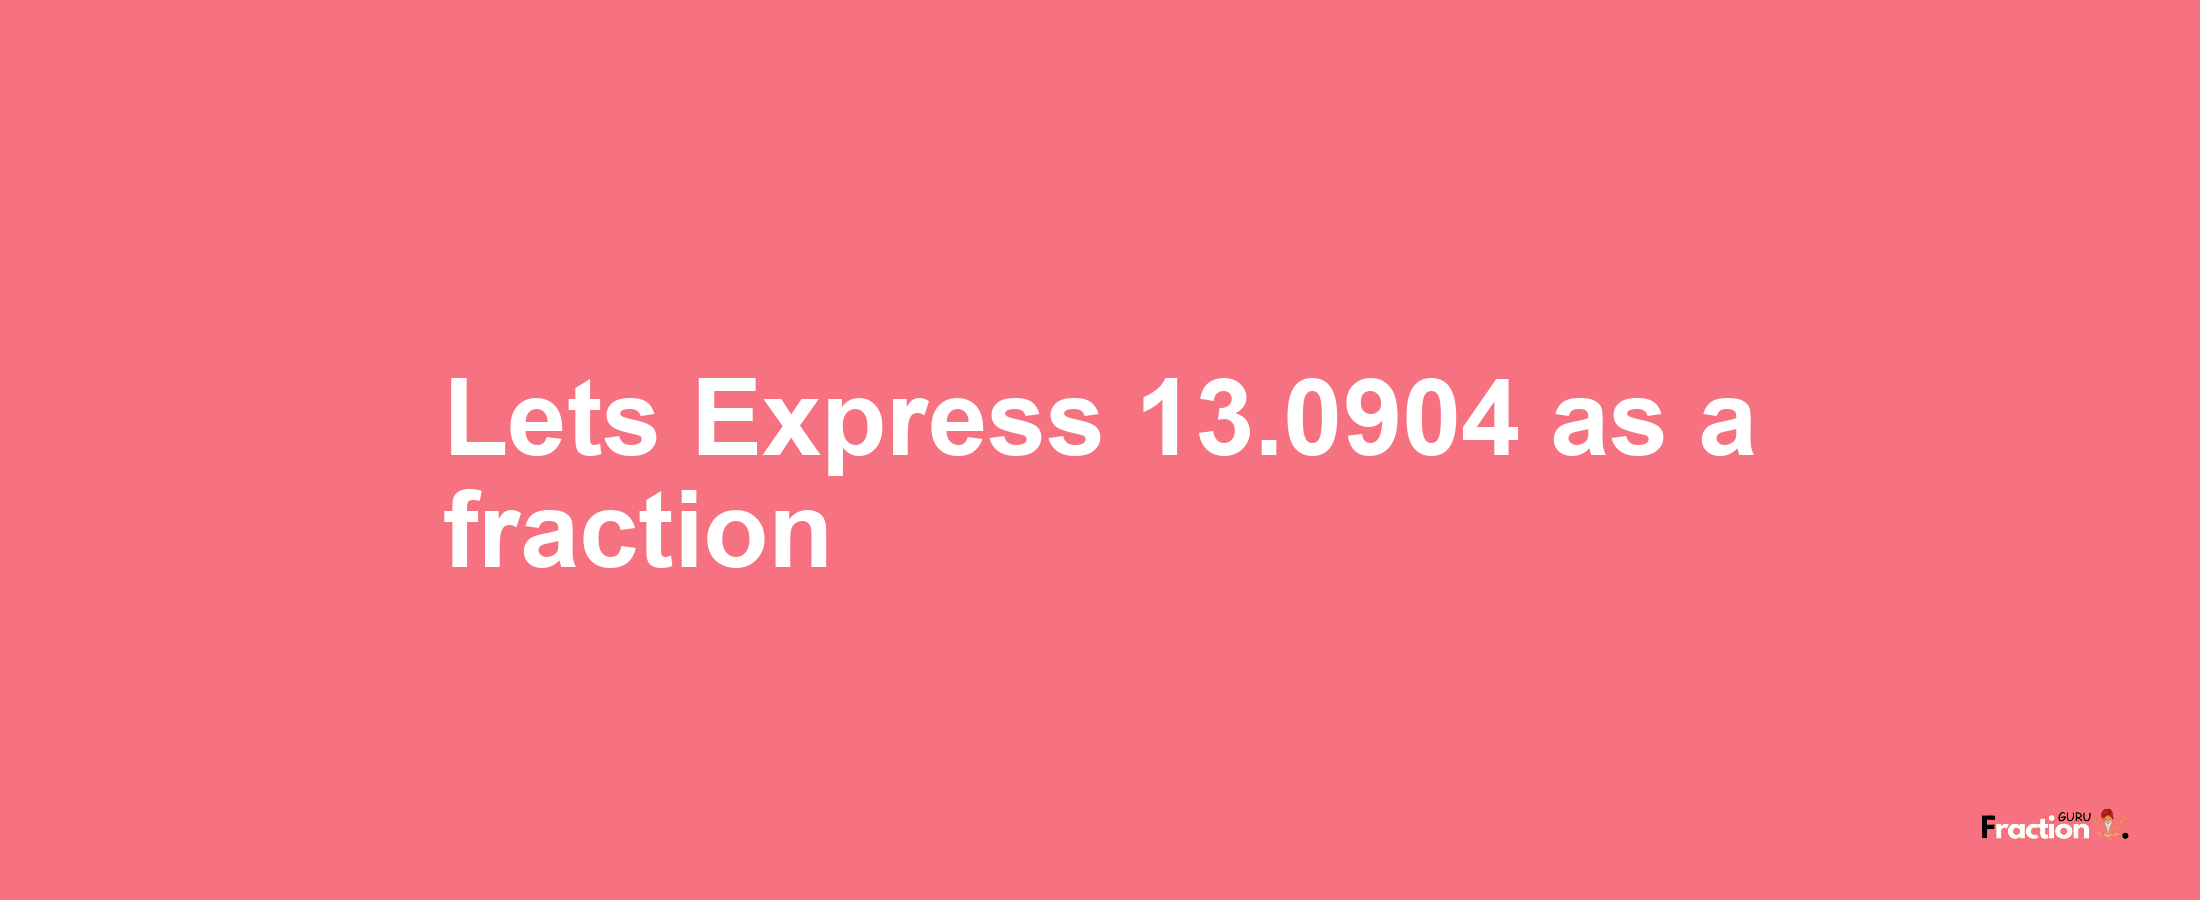 Lets Express 13.0904 as afraction